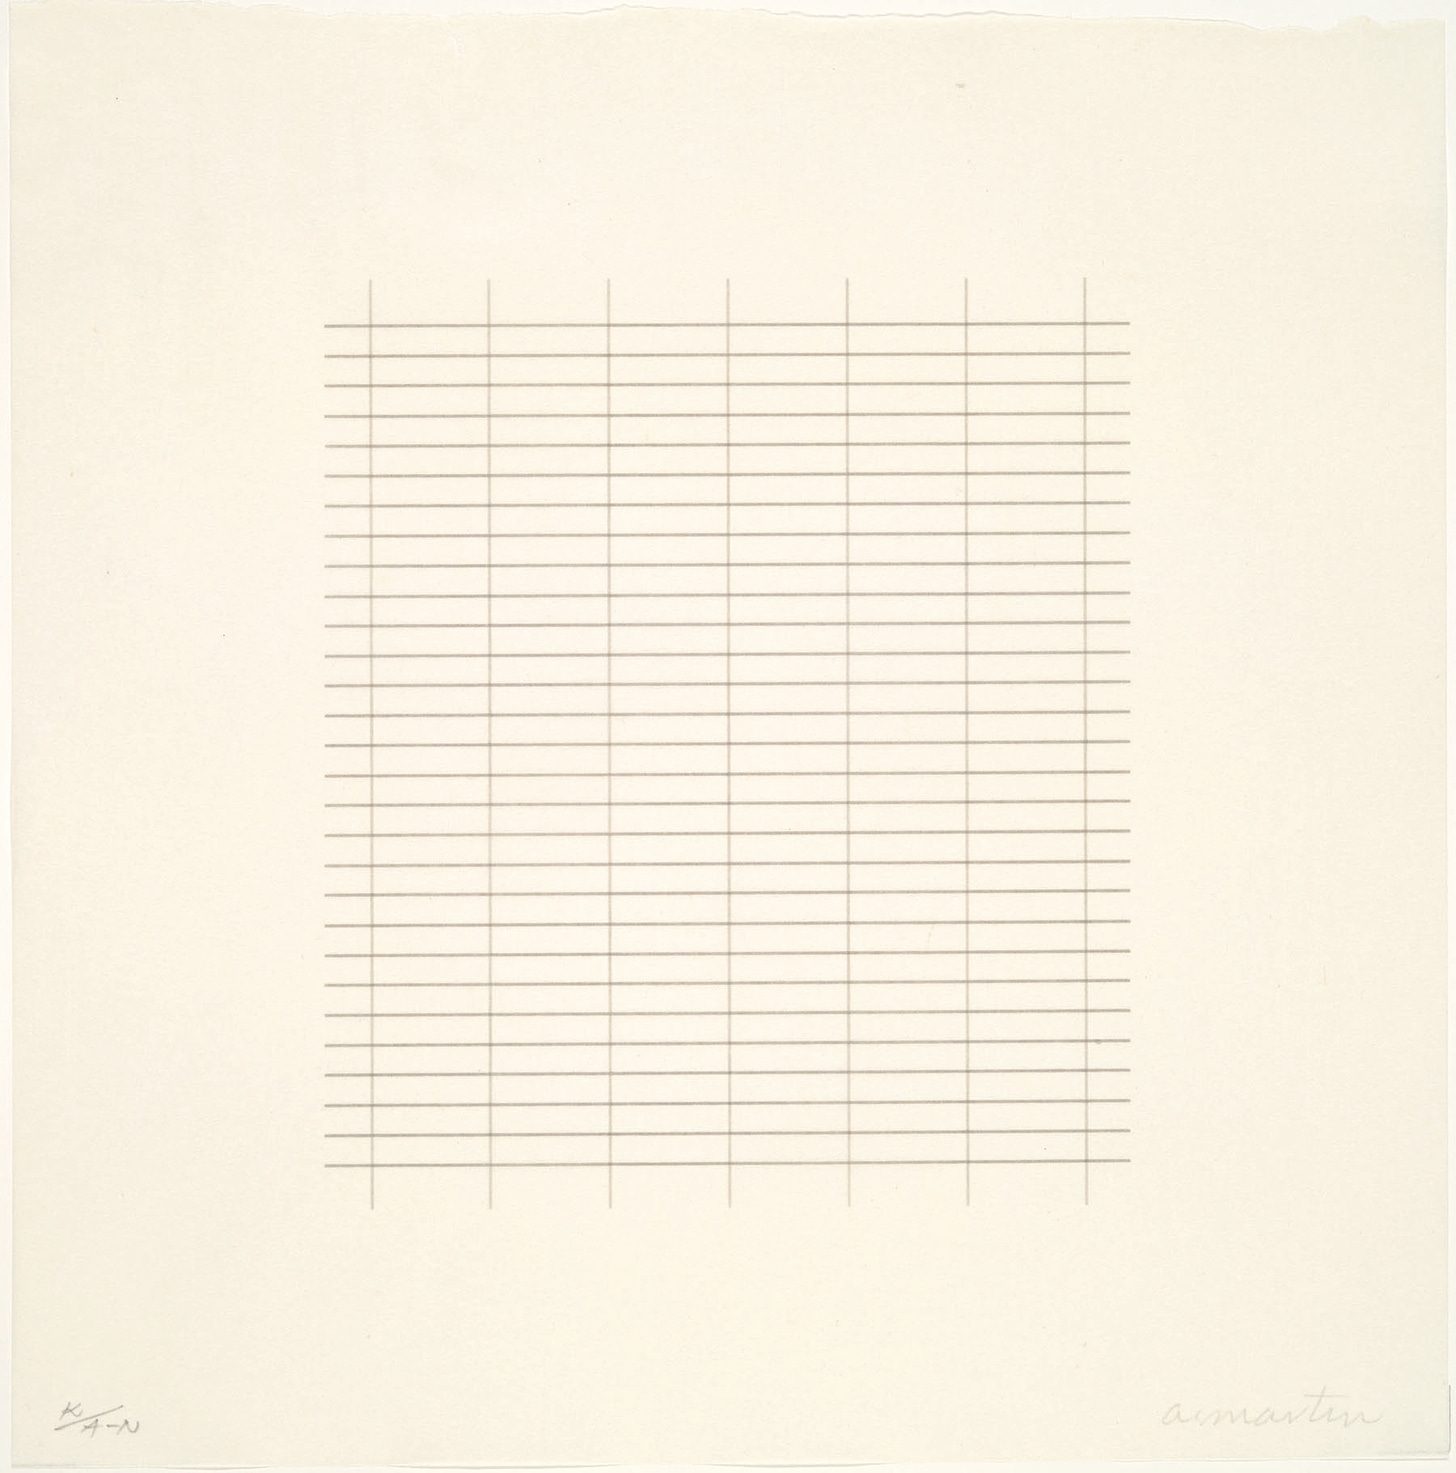 The House that Agnes Martin Built - Image Journal